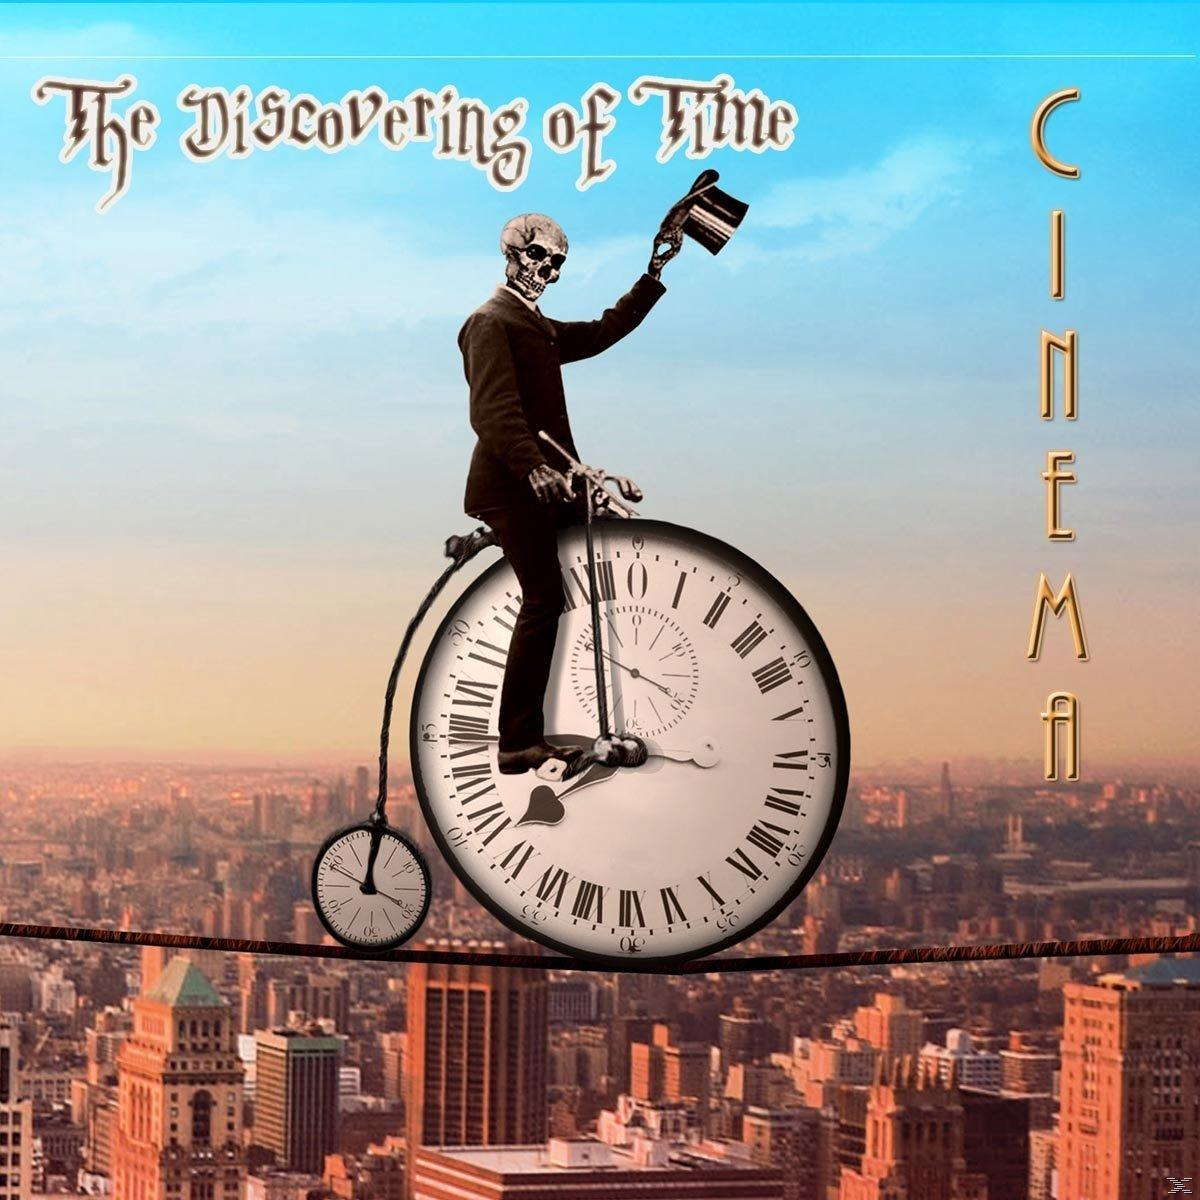 - (CD) Discovering Of Time Cinema - The